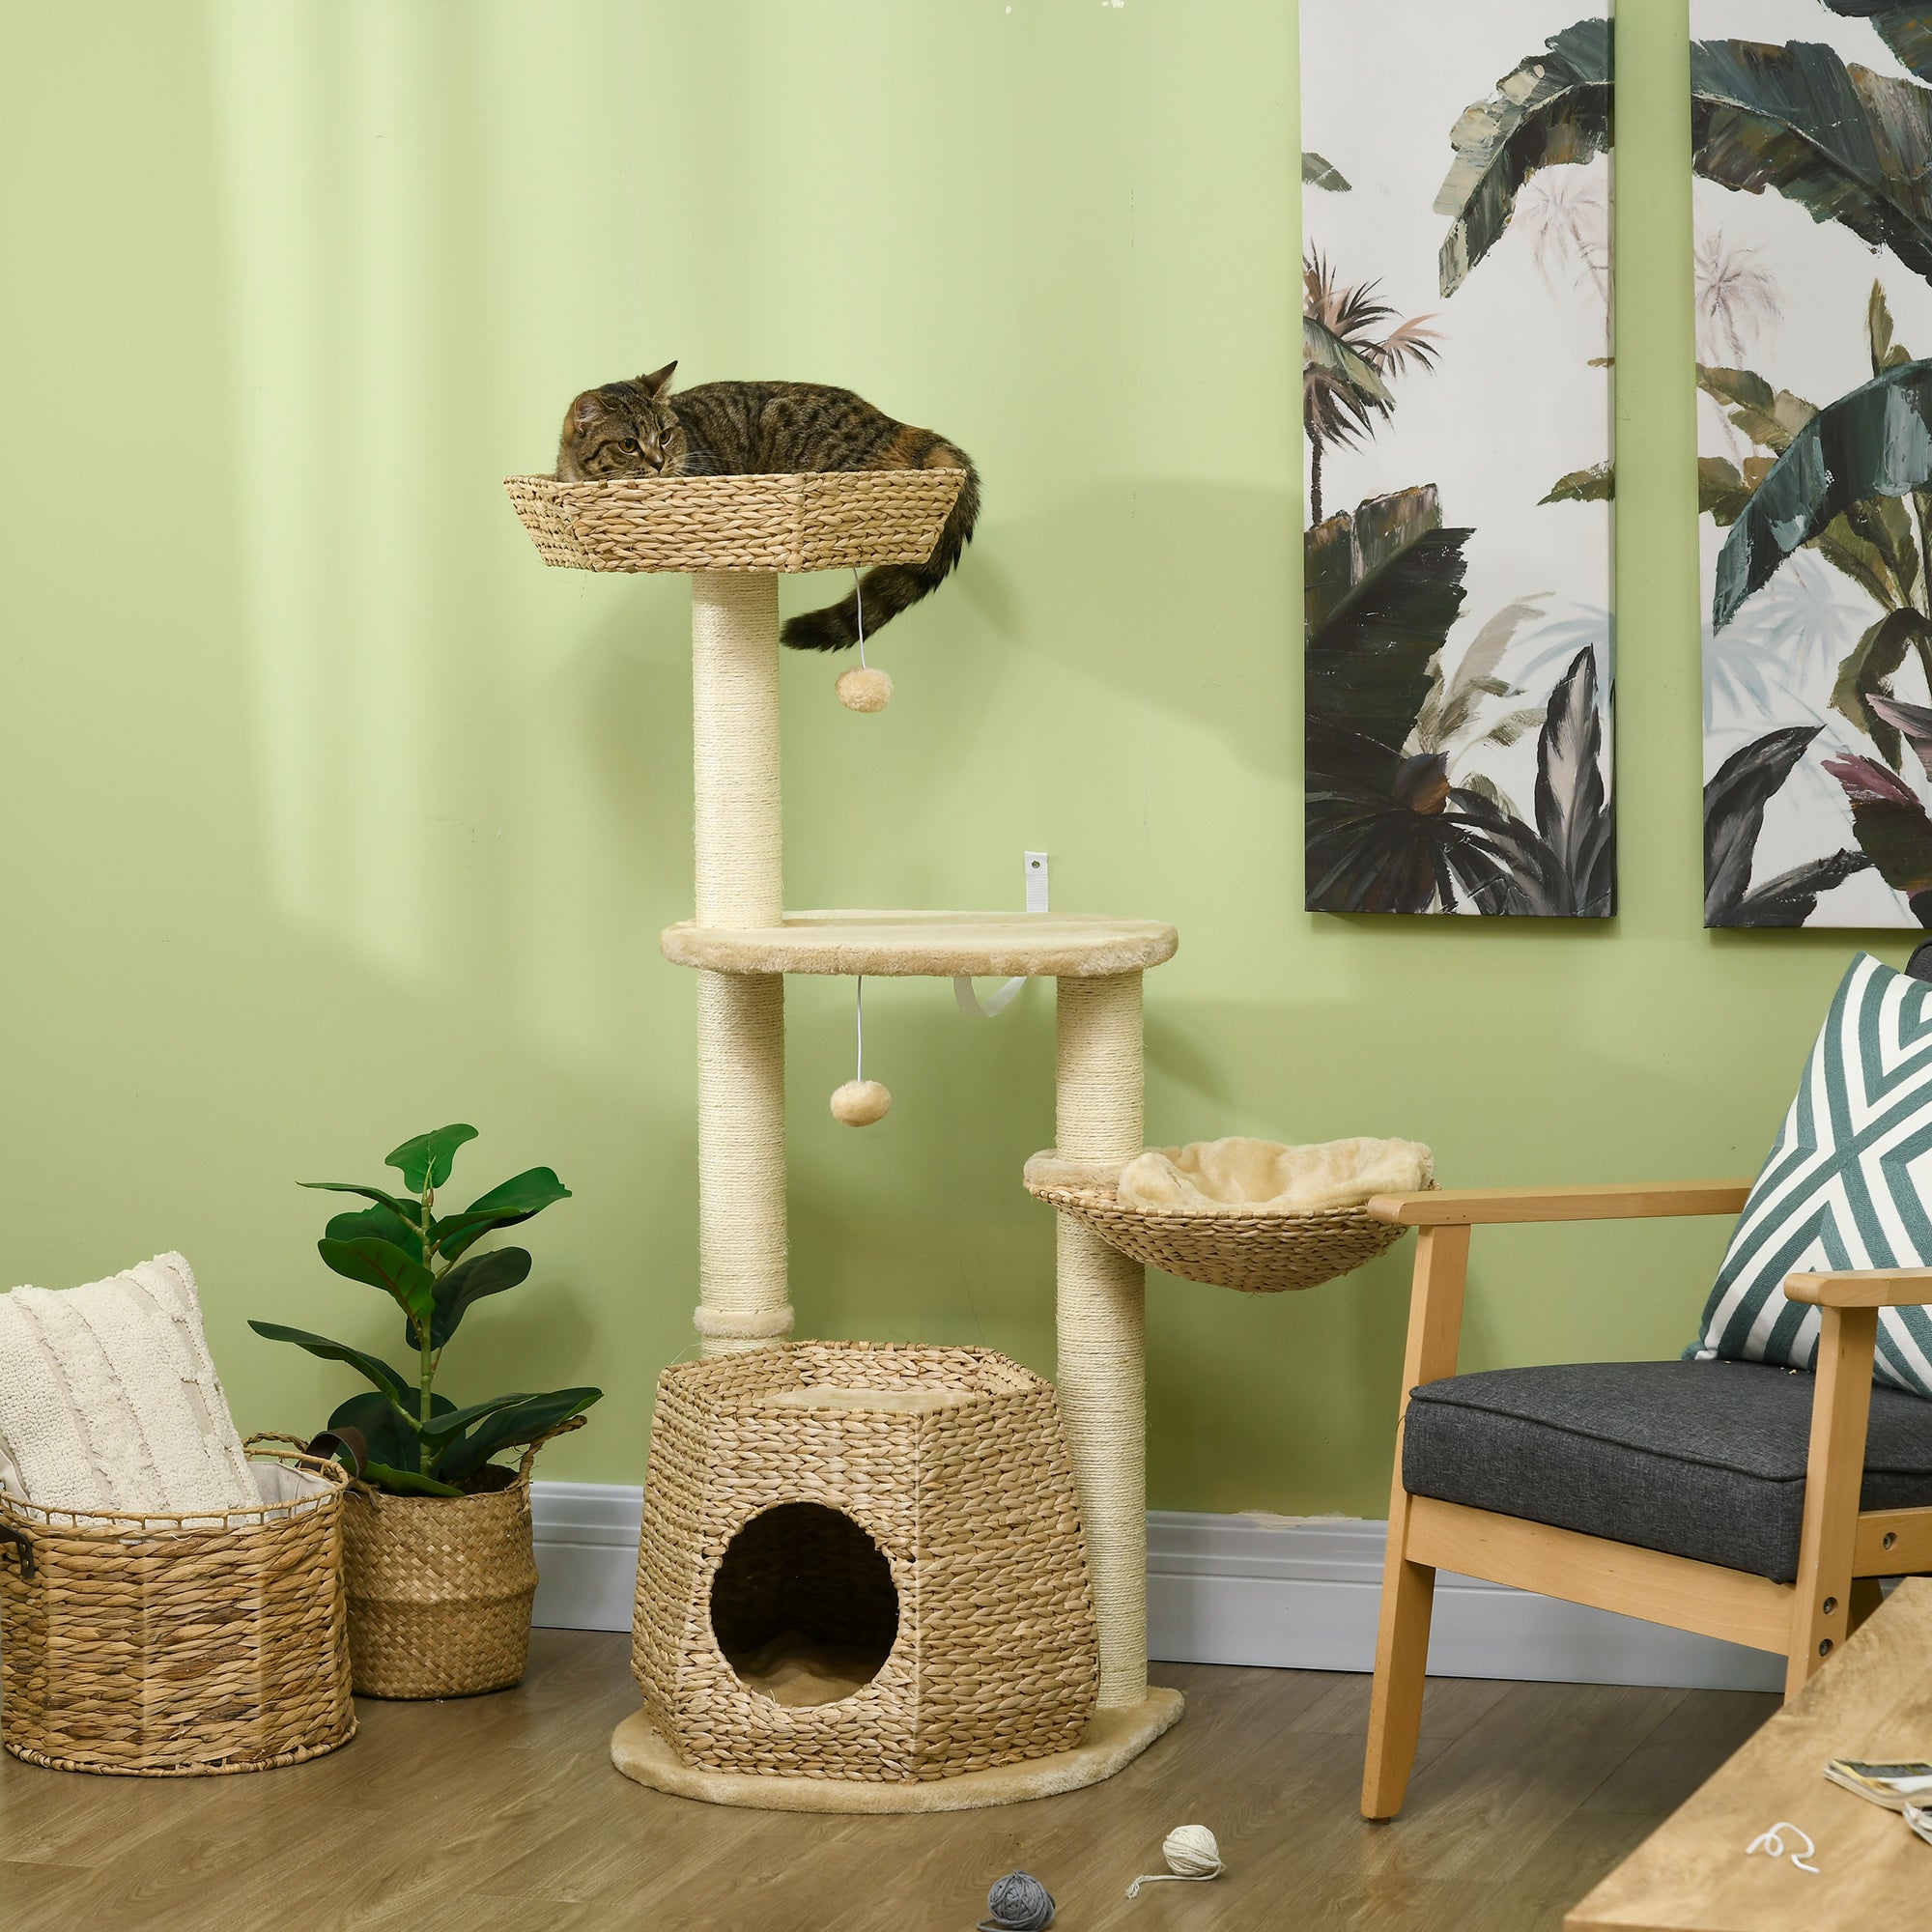 Cat Tree Activity Centre, with Cattail, Bed, Cat House, Sisal Post, Ball - Natural Tone, PawHut,